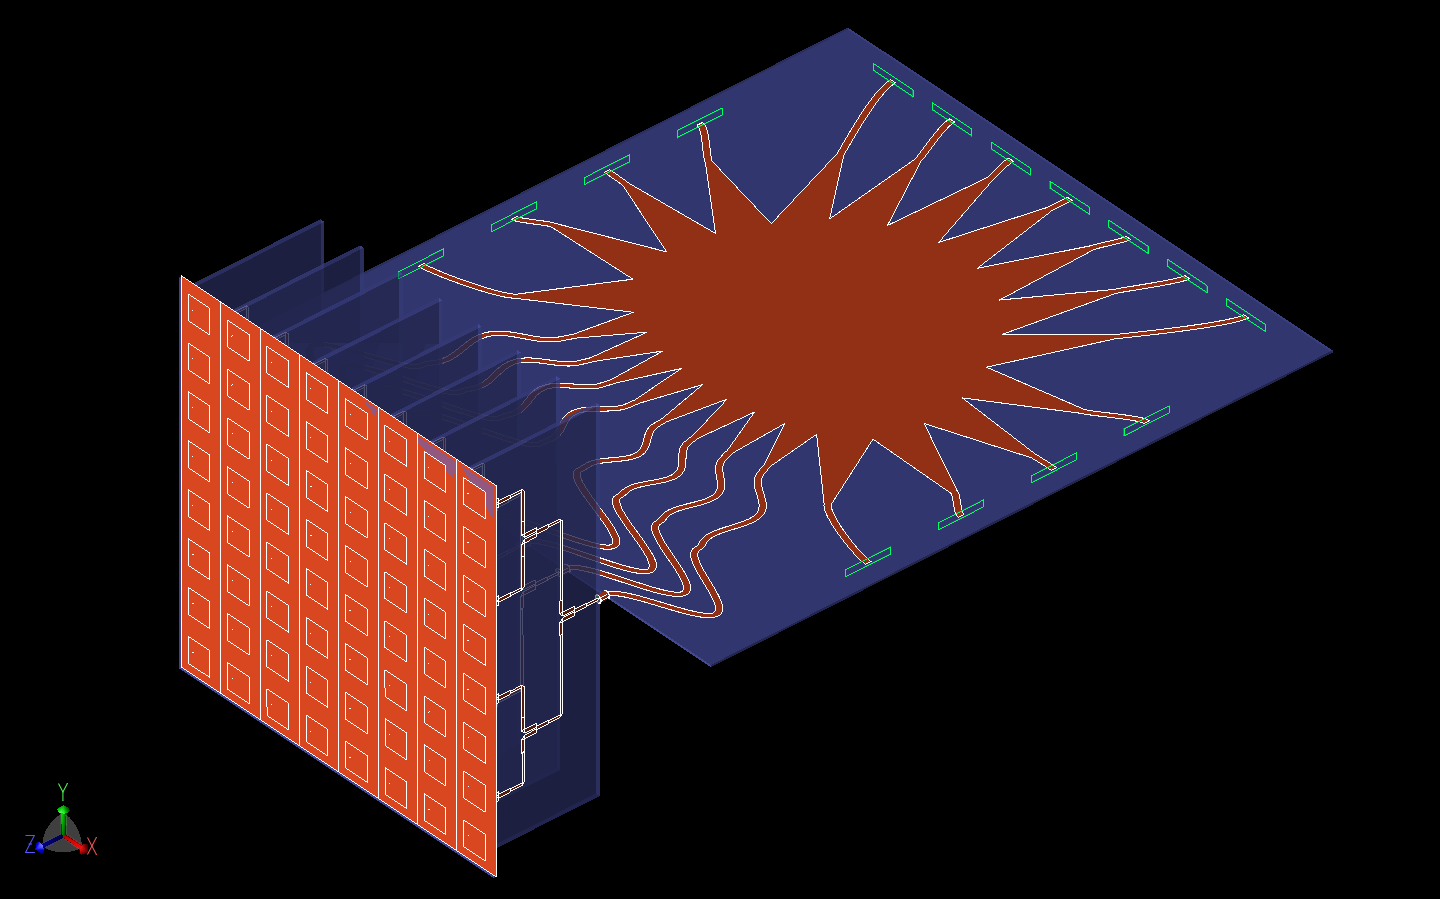 Figure 14: Here the complete system of the Rotman lens input, Wilkinson power divider stage, and 8x8 patch antenna array are shown as a three-dimensional CAD model.